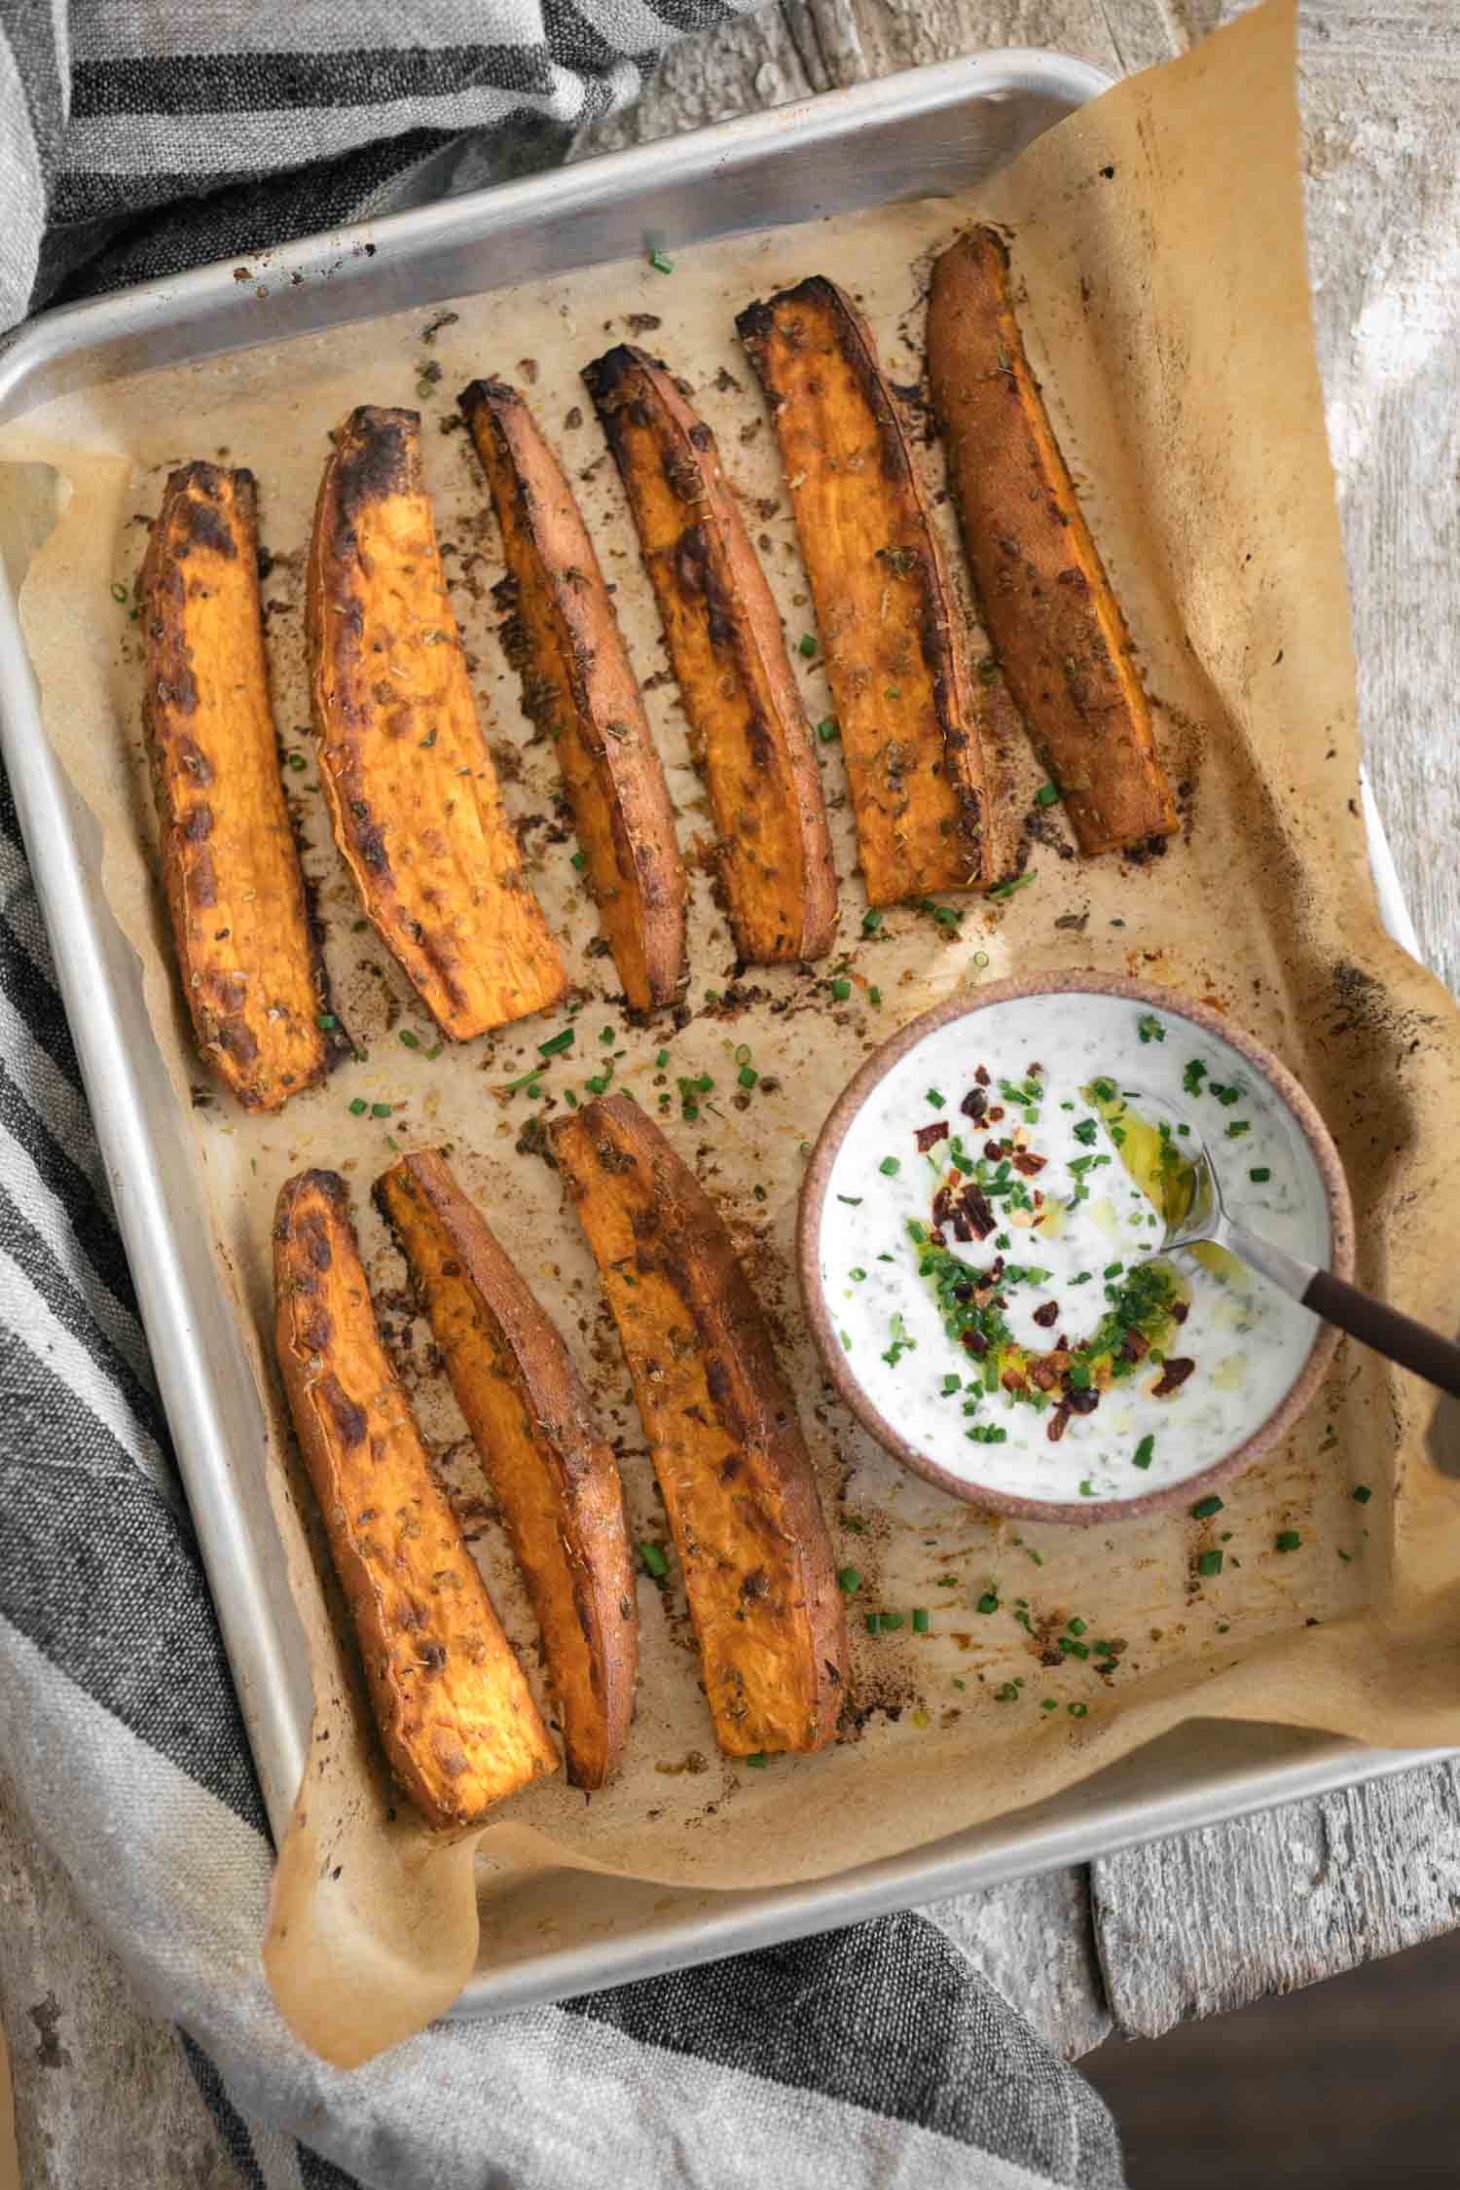 Spiced Sweet Potato Wedges with Chive Cream